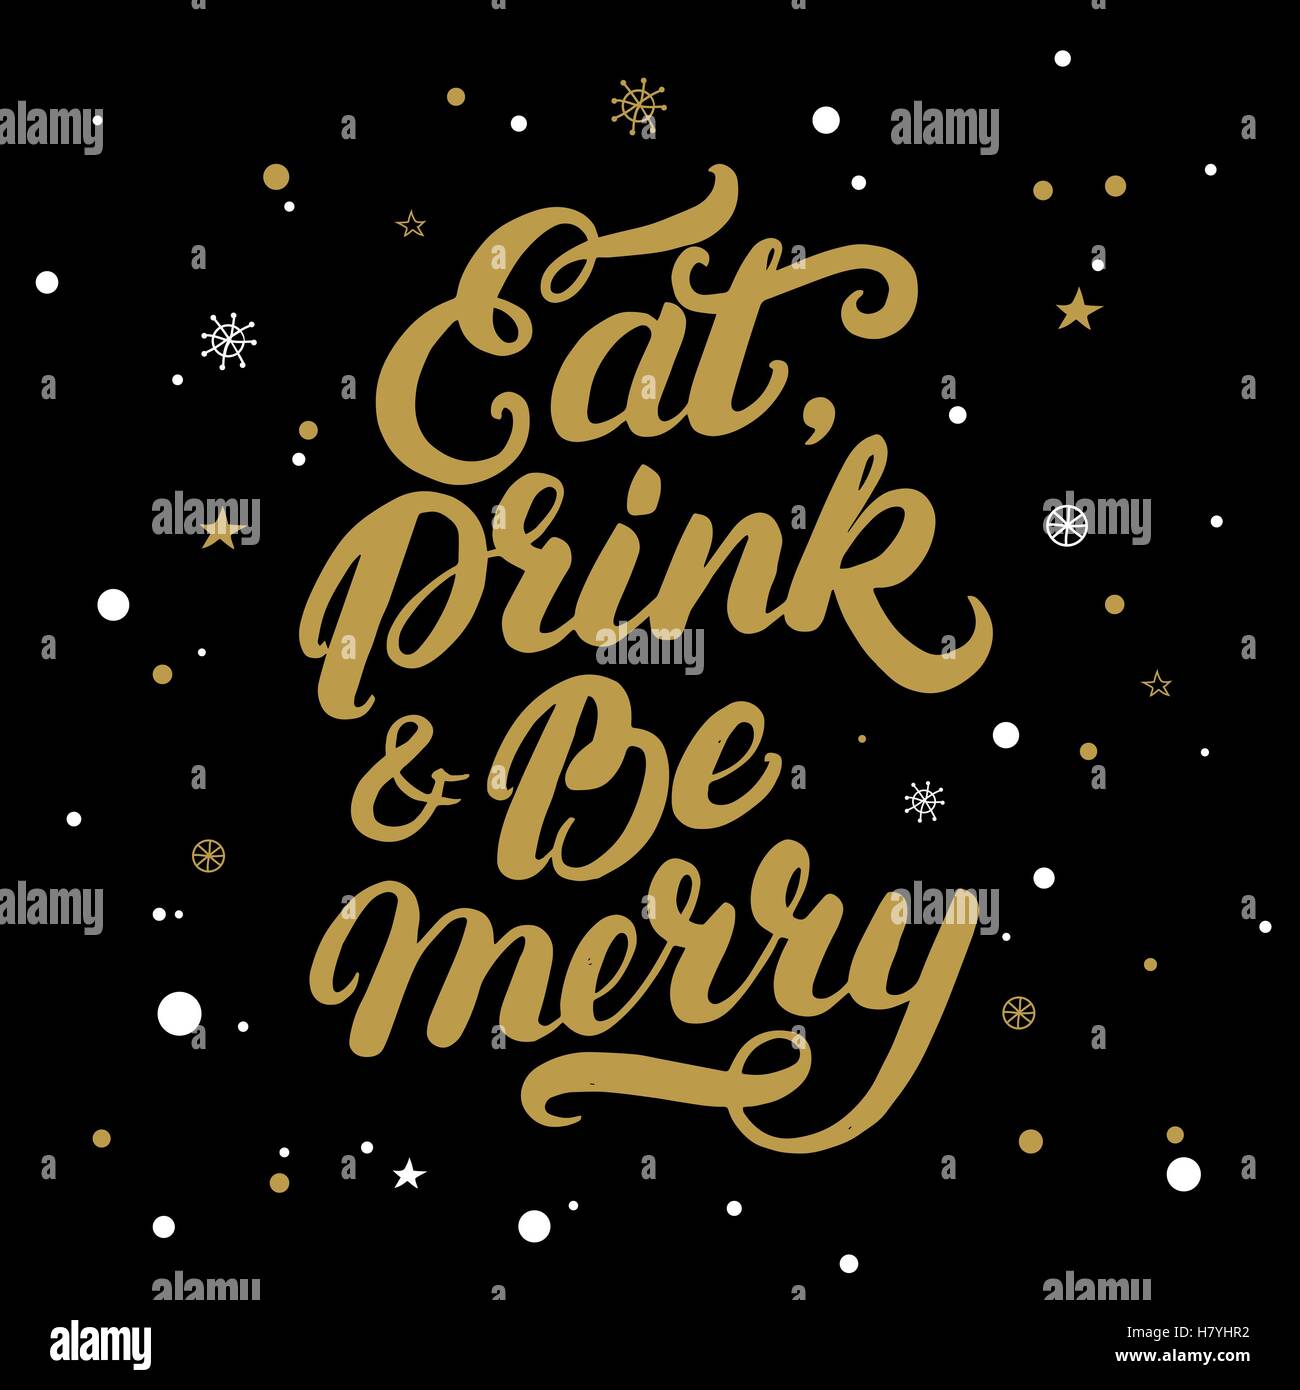 Lettering eat drink and be merry for christmasnew Vector Image